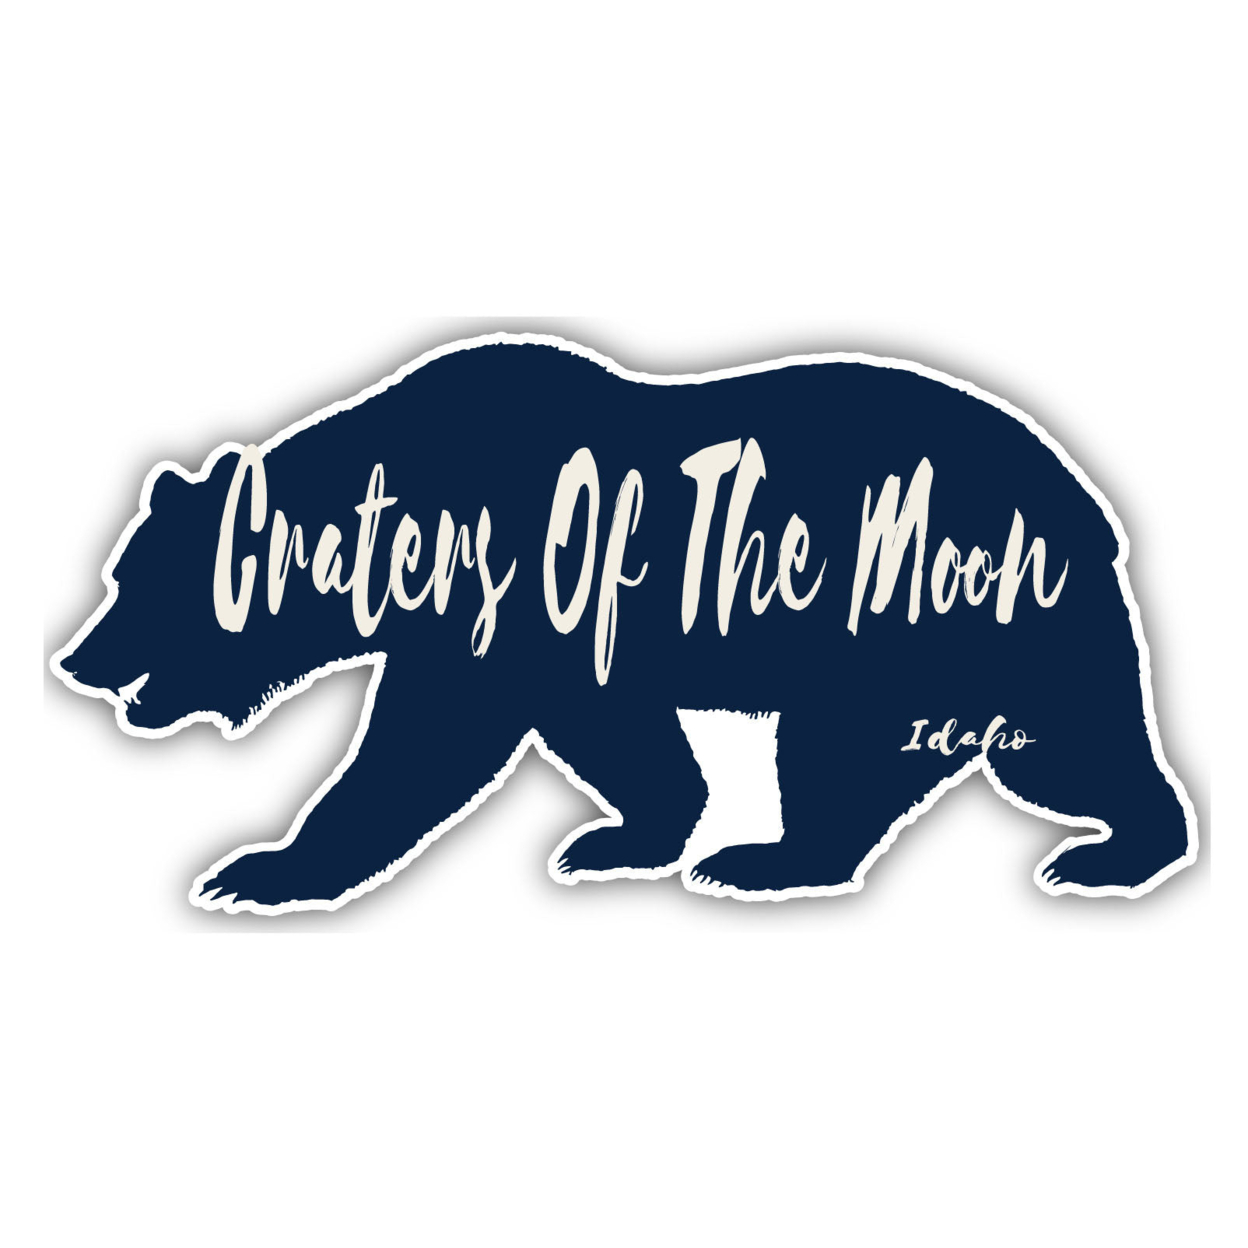 Craters Of The Moon Idaho Souvenir Decorative Stickers (Choose Theme And Size) - 4-Pack, 2-Inch, Bear